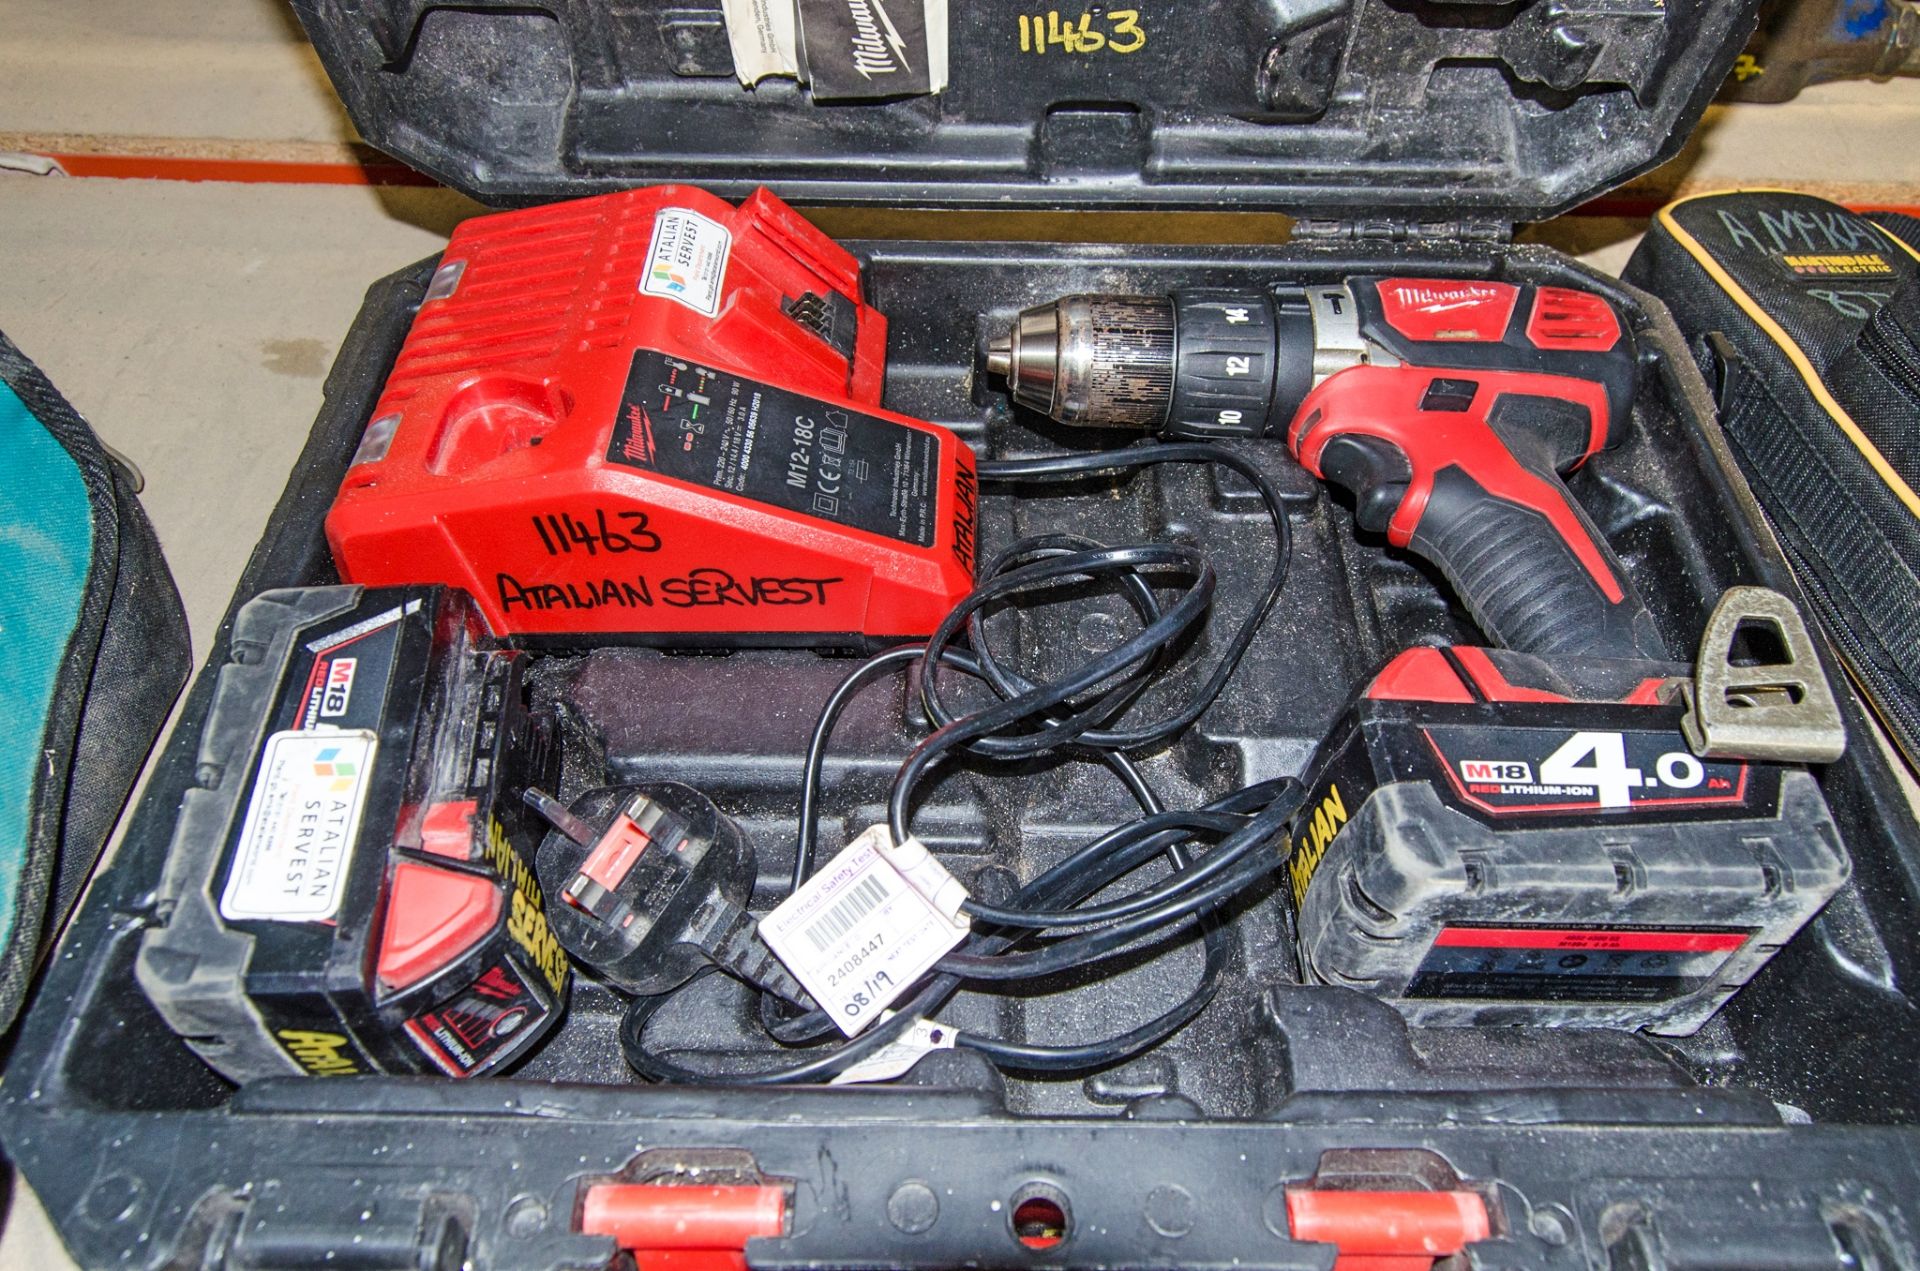 Milwaukee M18 BPD 18v cordless power drill c/w 2 - batteries, charger and carry case AS11463